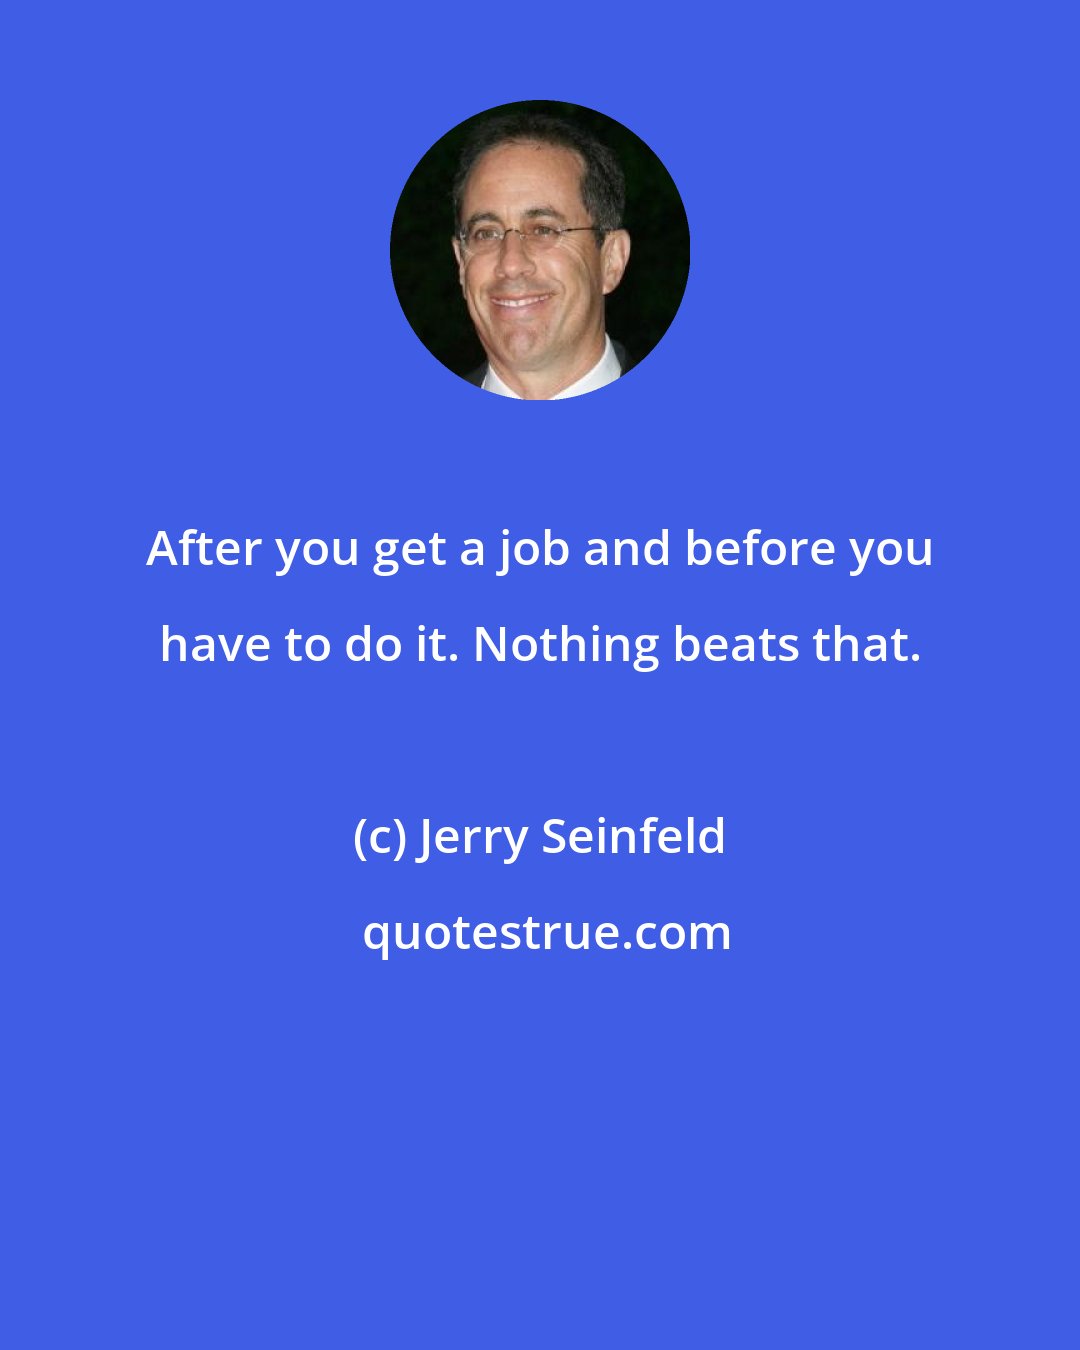 Jerry Seinfeld: After you get a job and before you have to do it. Nothing beats that.